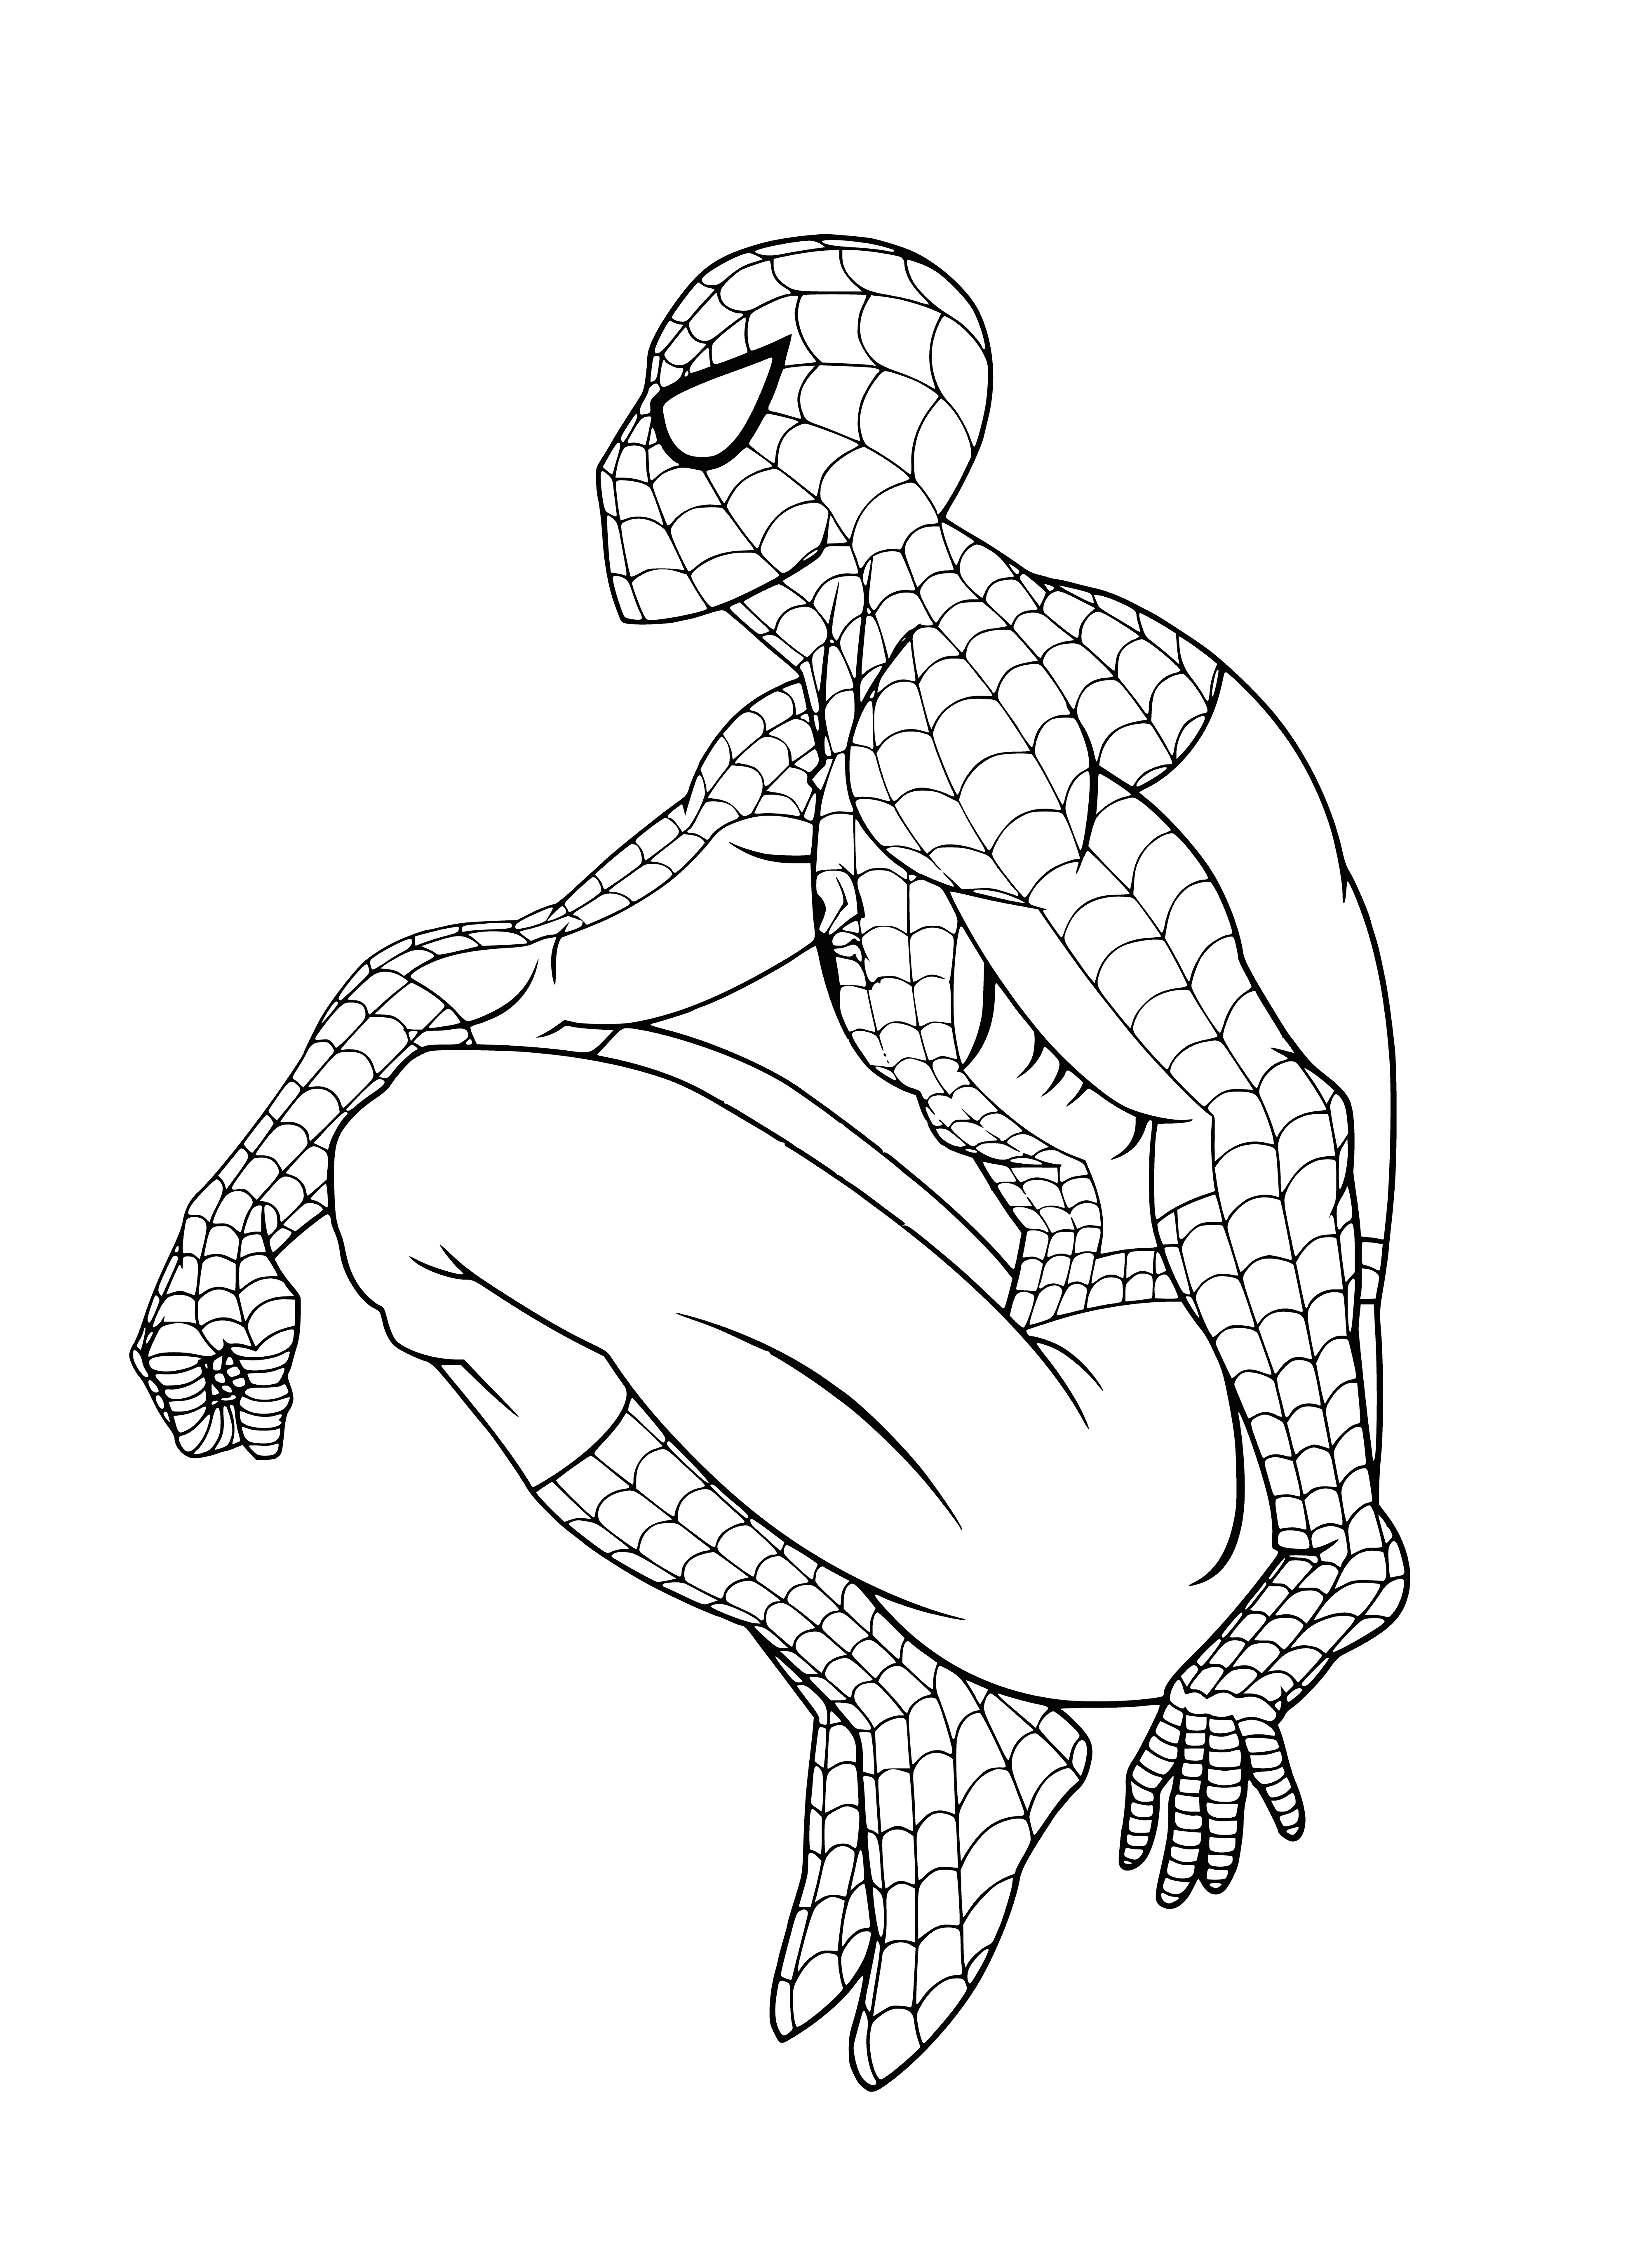 coloring page: Spiderman stands atop a building, masked in red & blue with a billowing cape. A symbol of heroism, determined to protect the city and its citizens. #Spiderman